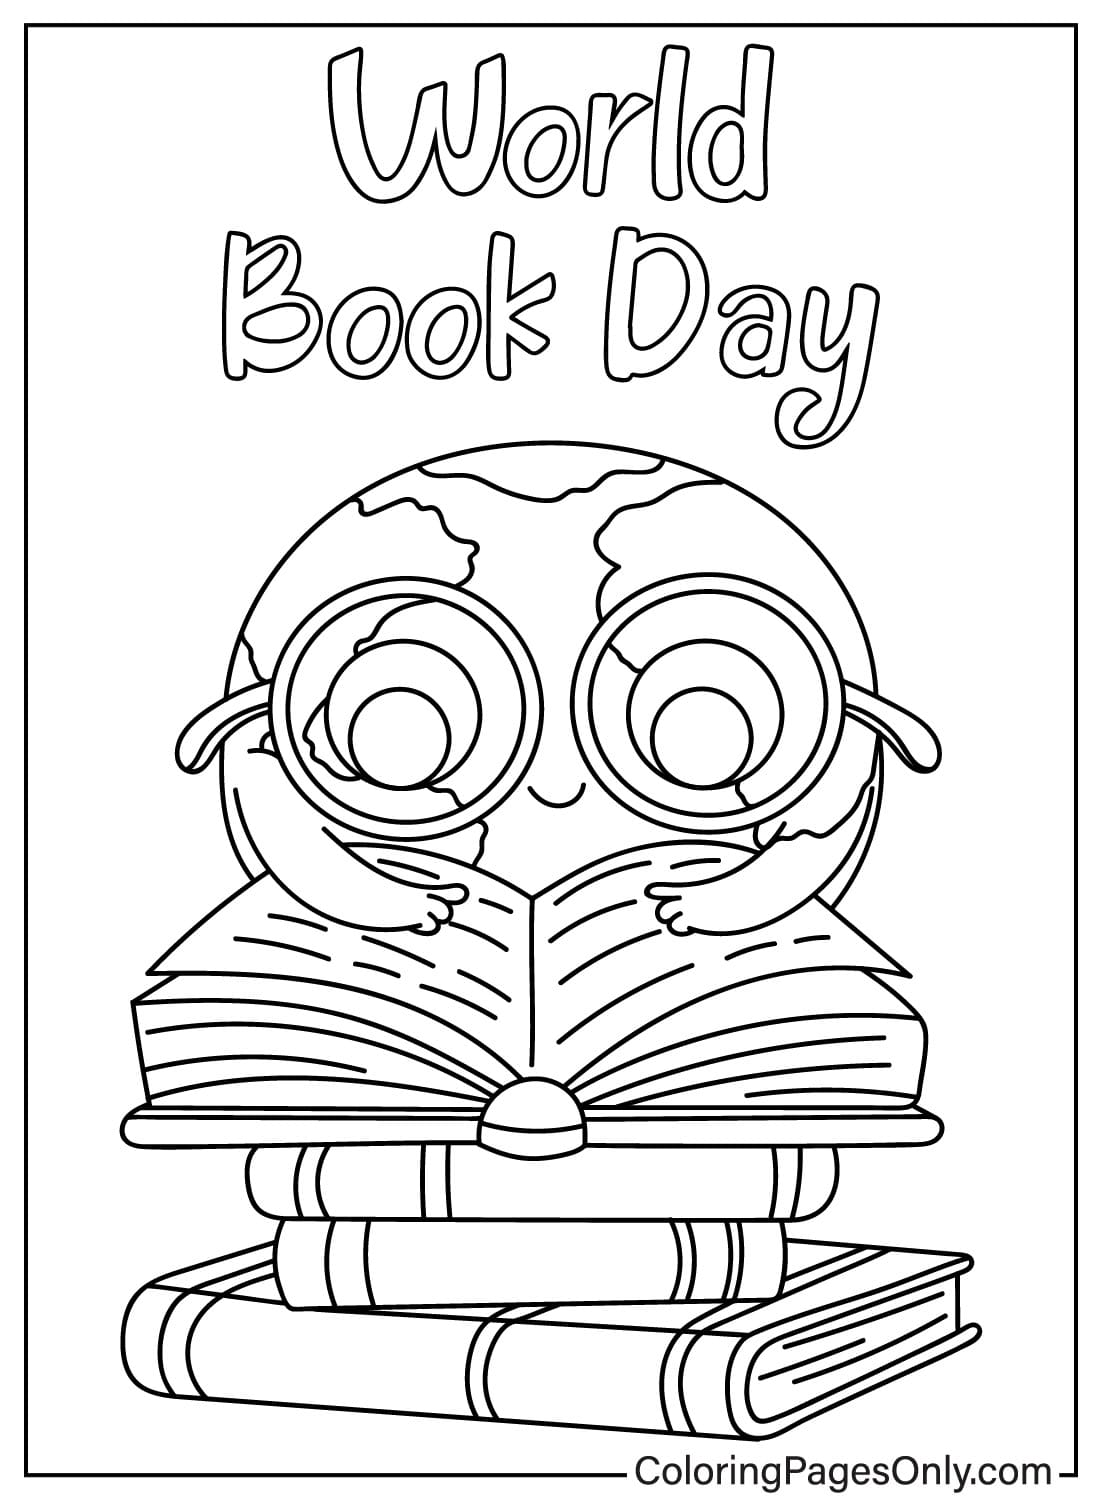 World Book Day Coloring Page from World Book Day